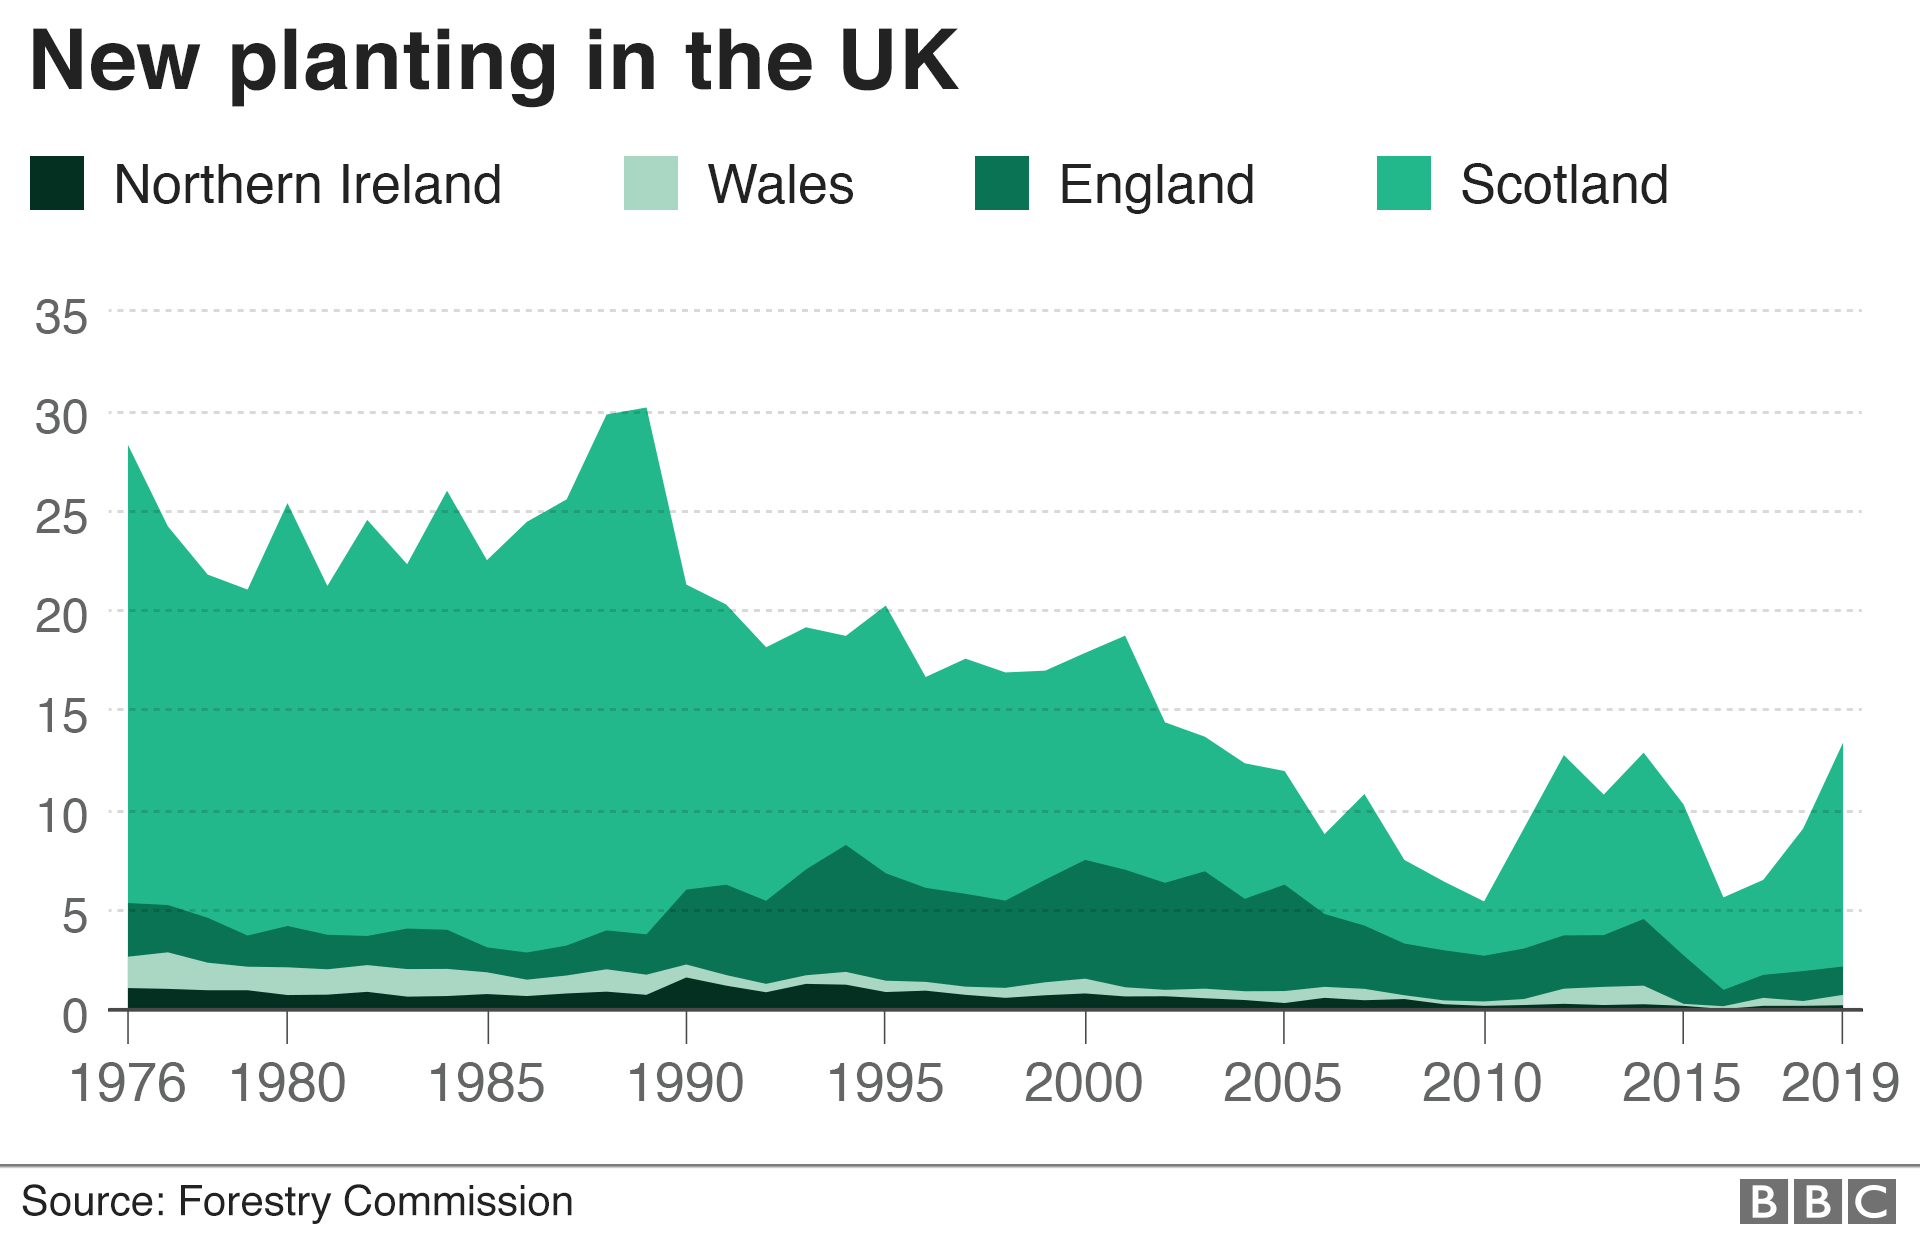 Graph showing new planting in the UK